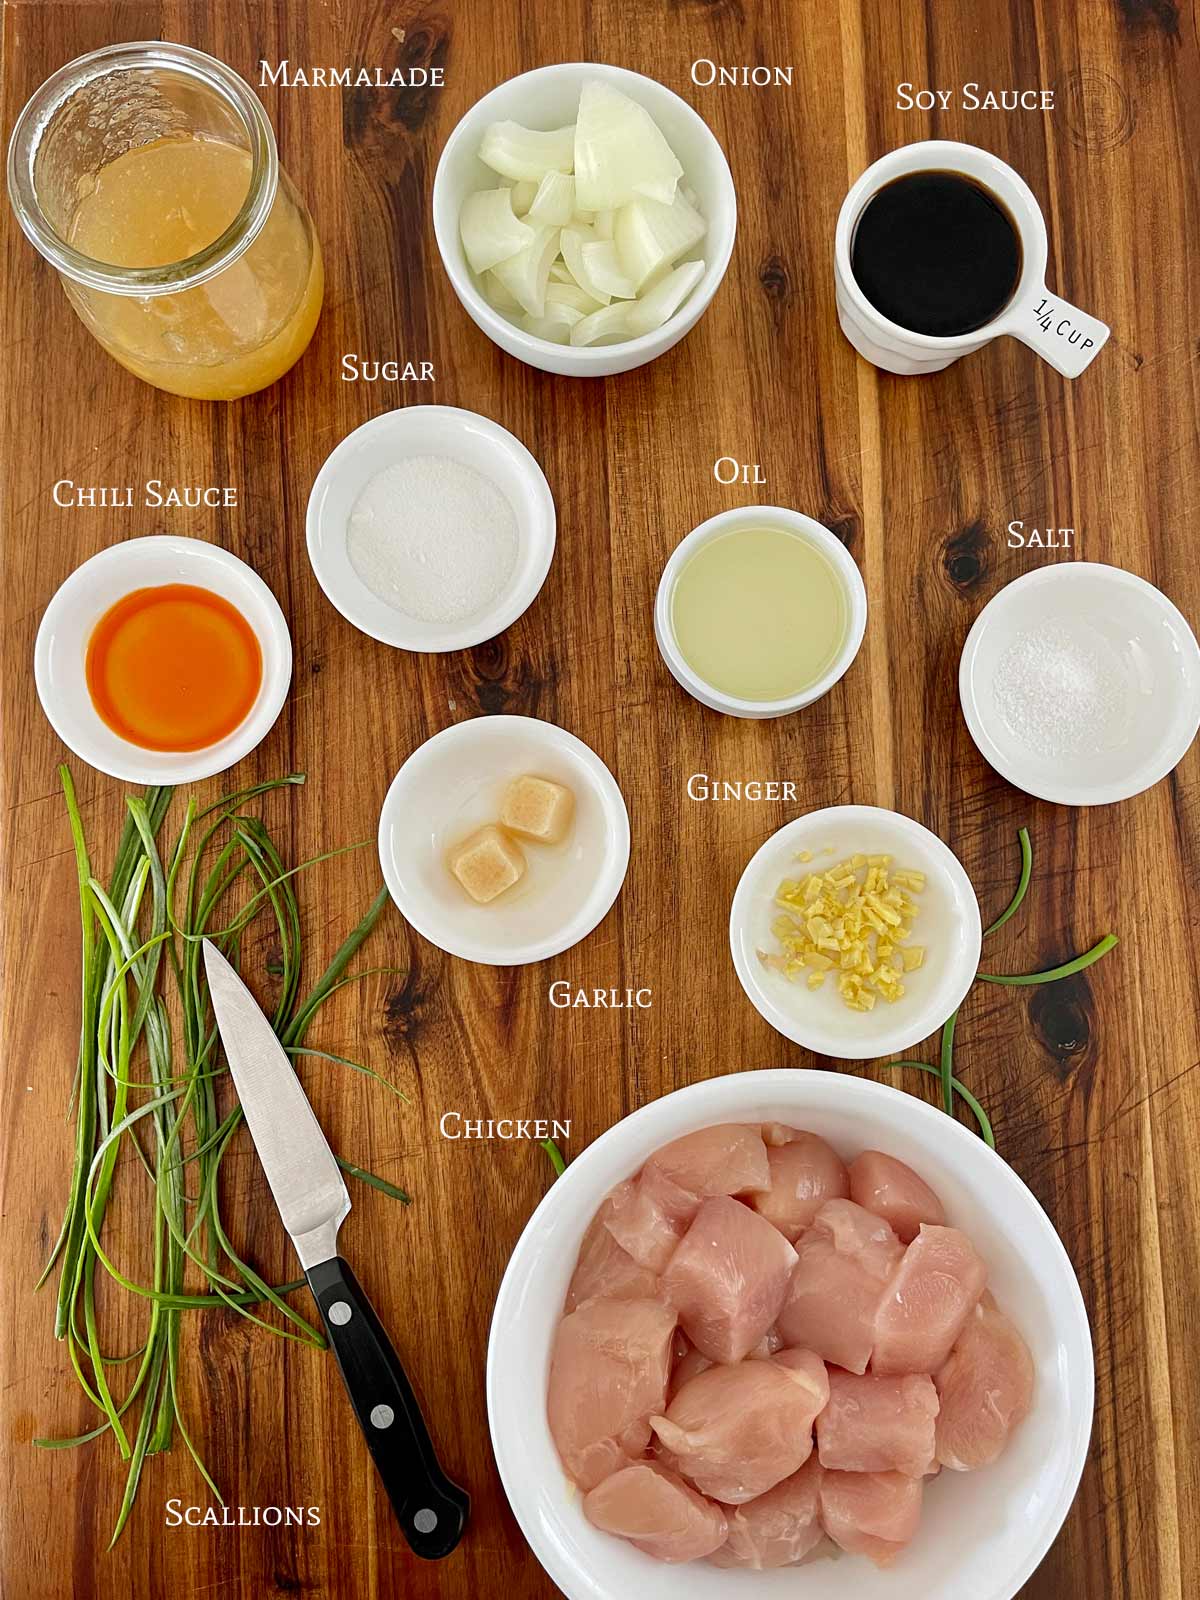 All the ingredients for Sticky Lemon Marmalade Chicken.